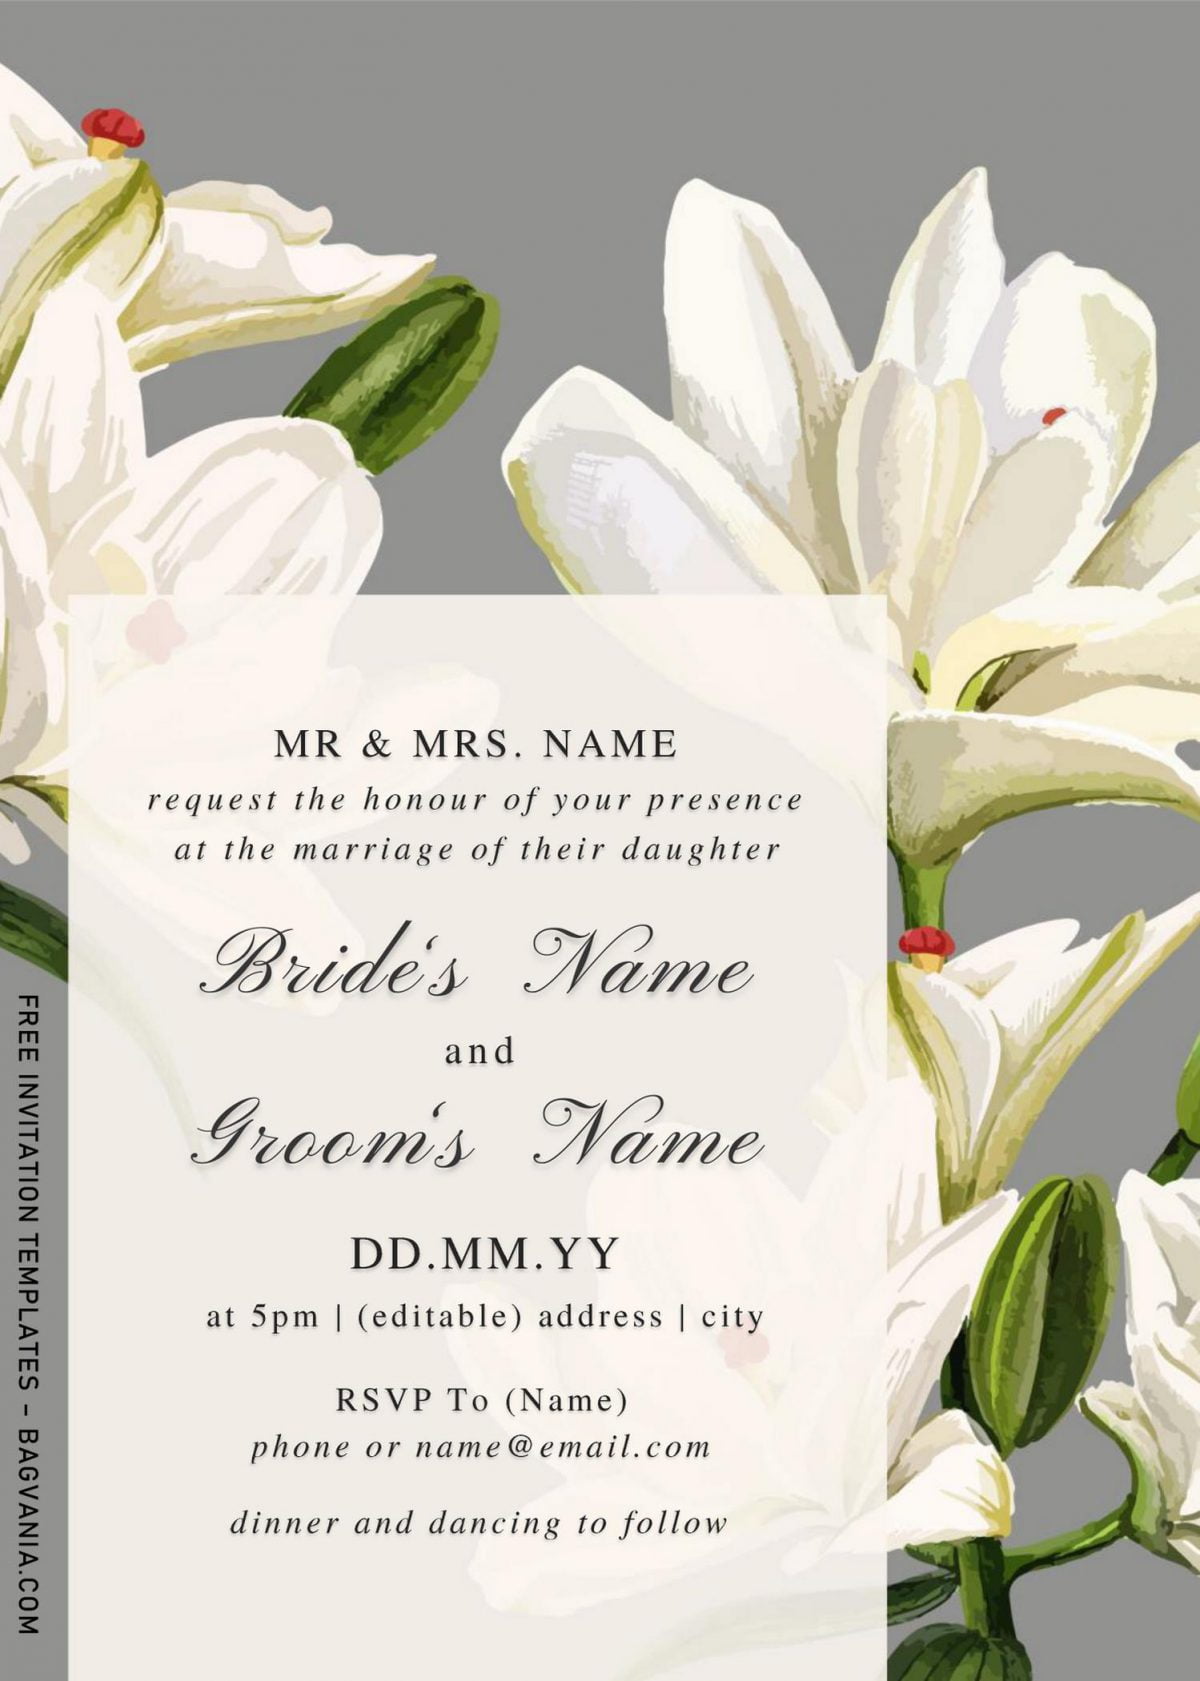 Free Watercolor Lily Wedding Invitation Templates For Word and has elegant design